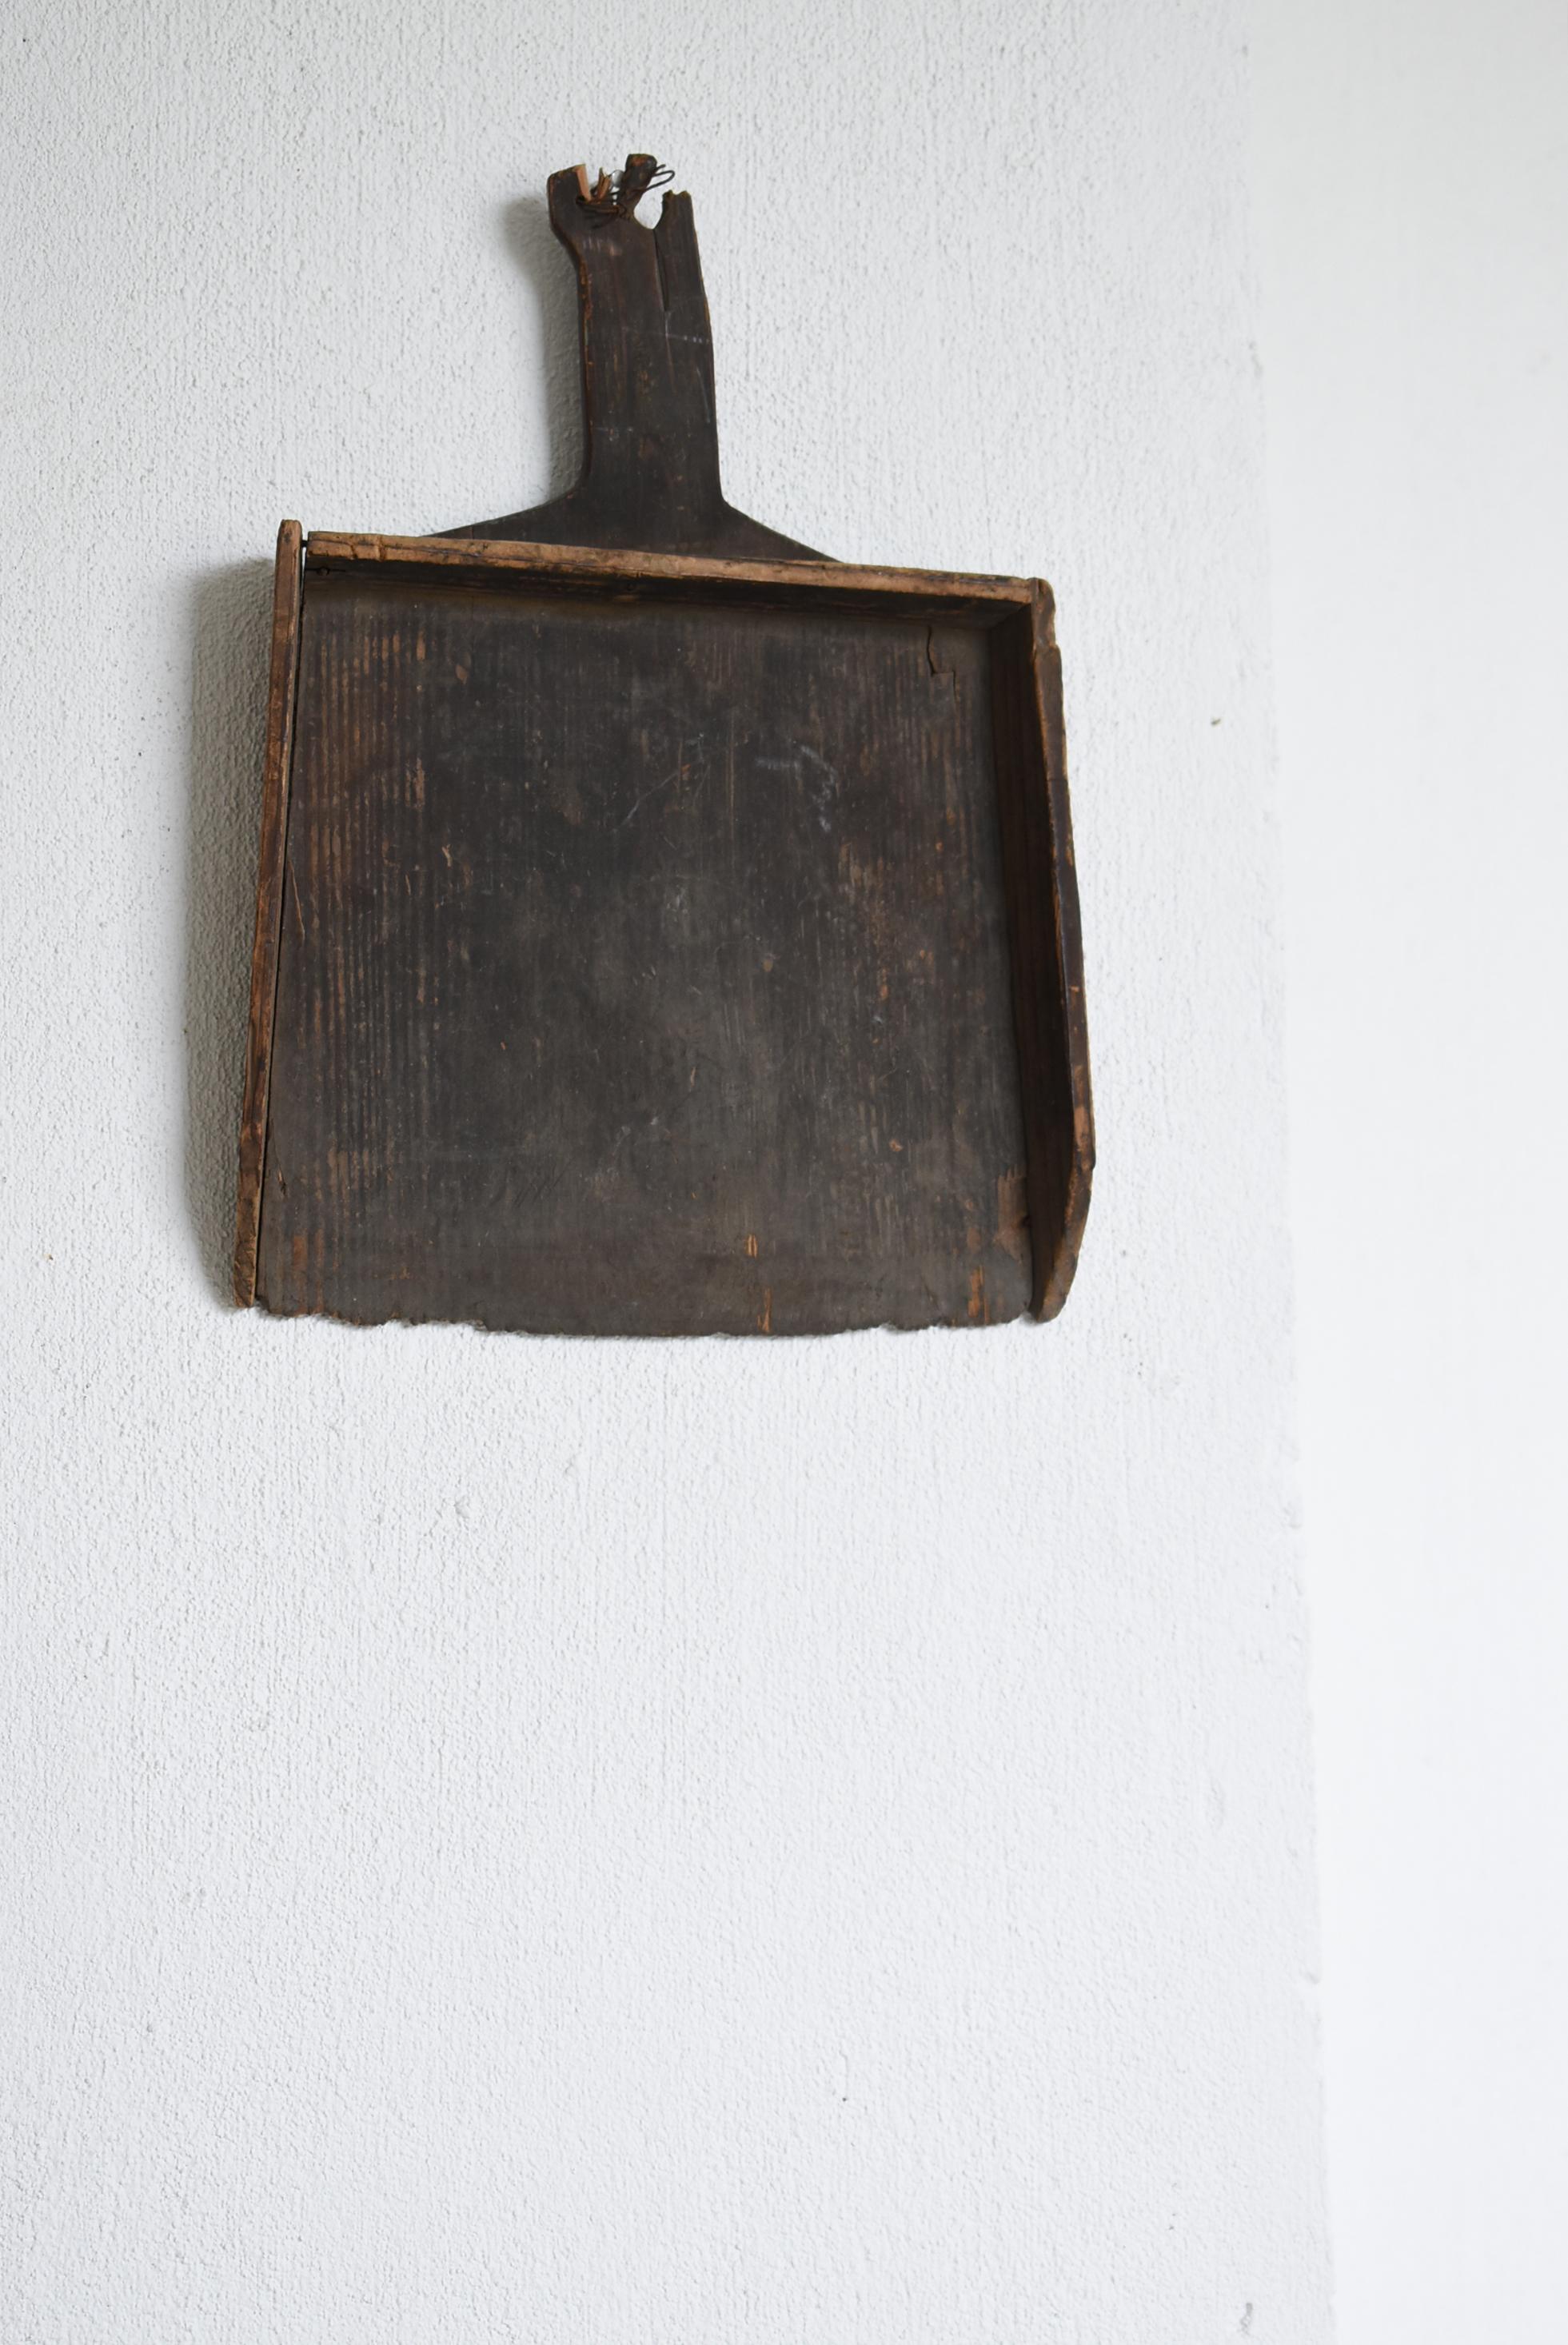 This is a very old Japanese wooden dustpan.
It is from the Taisho period (1910s-1920s).
It is made of cedar wood.

A memory of Japanese life and culture.
It is a miracle that this remains.

It is truly a wabi-sabi world.

Please enjoy it as